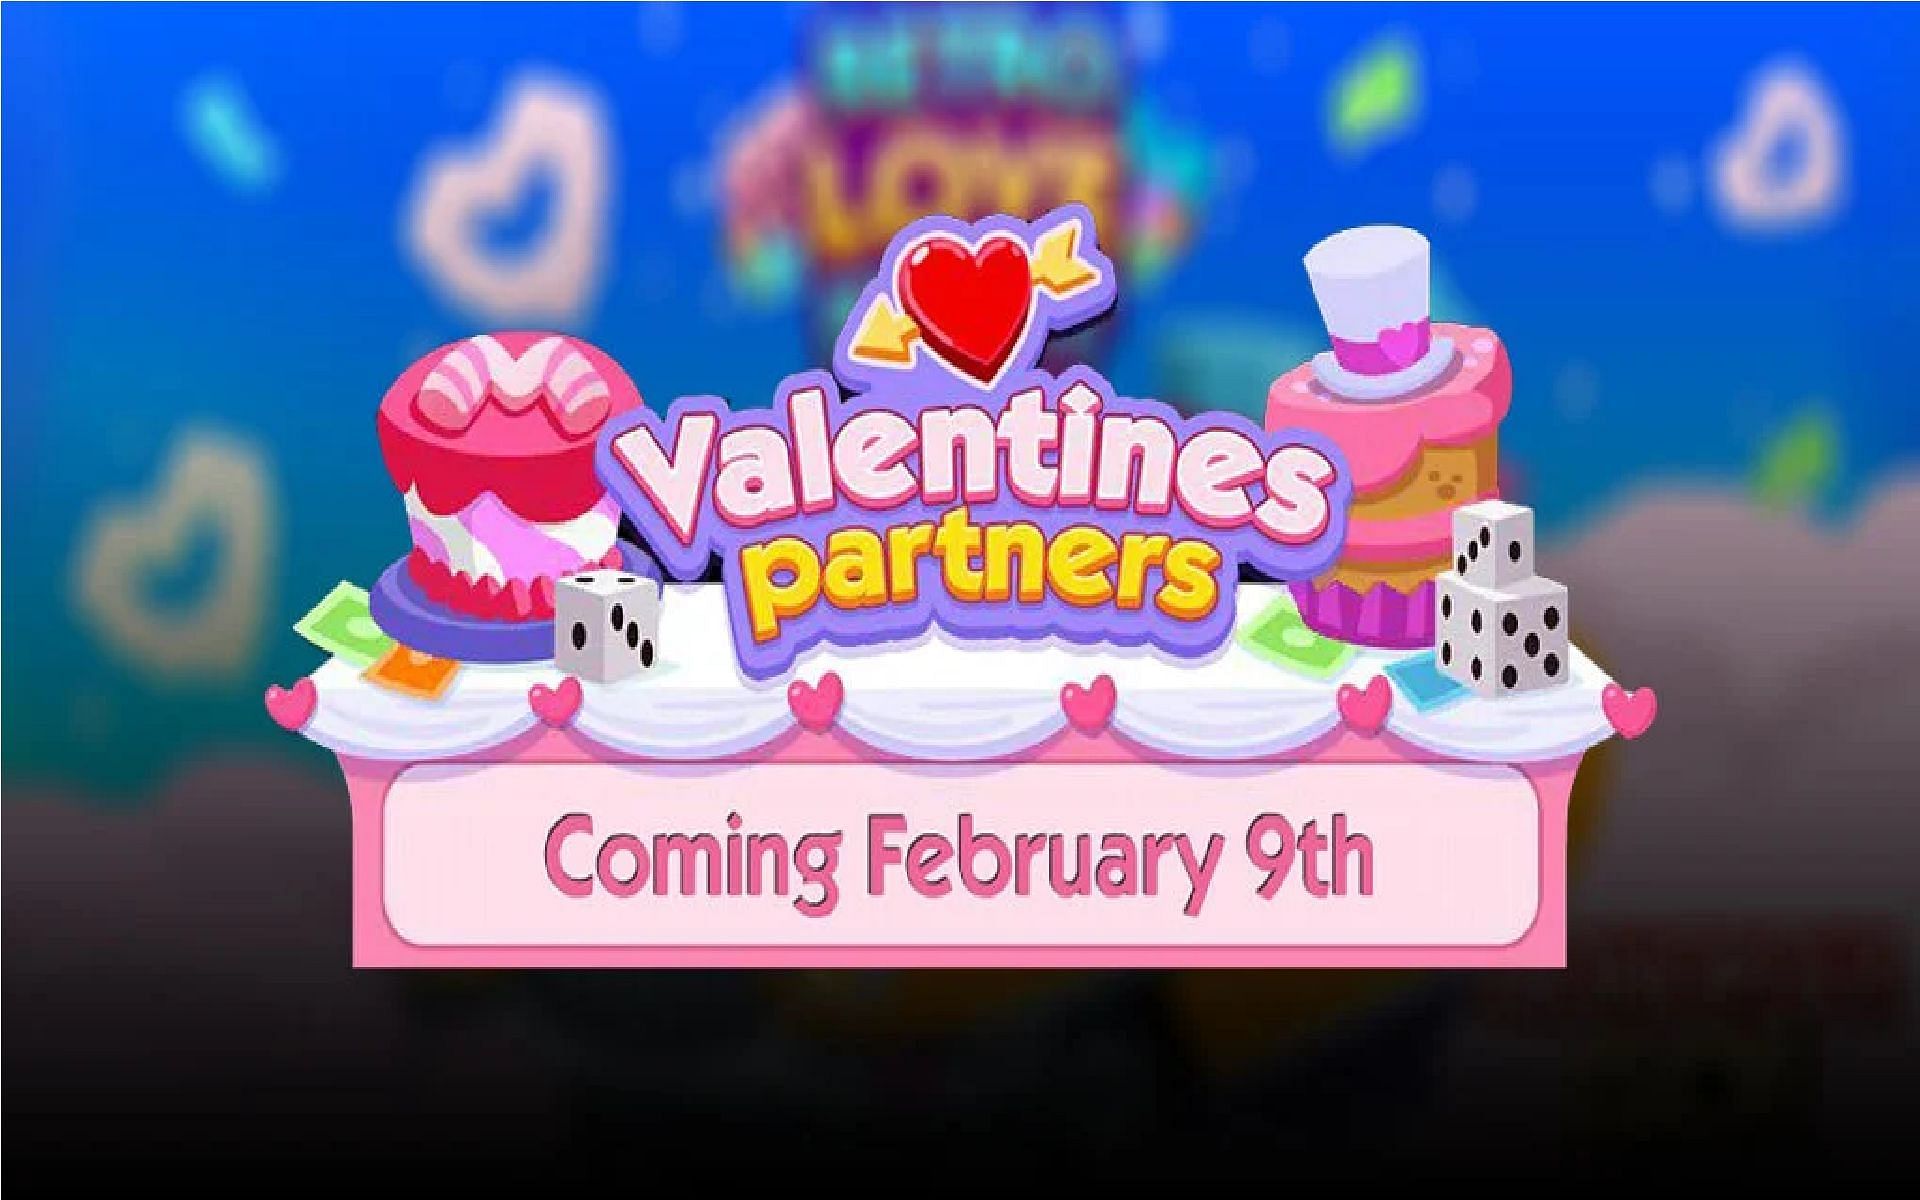 Here is the schedule for the Valentines Partners event